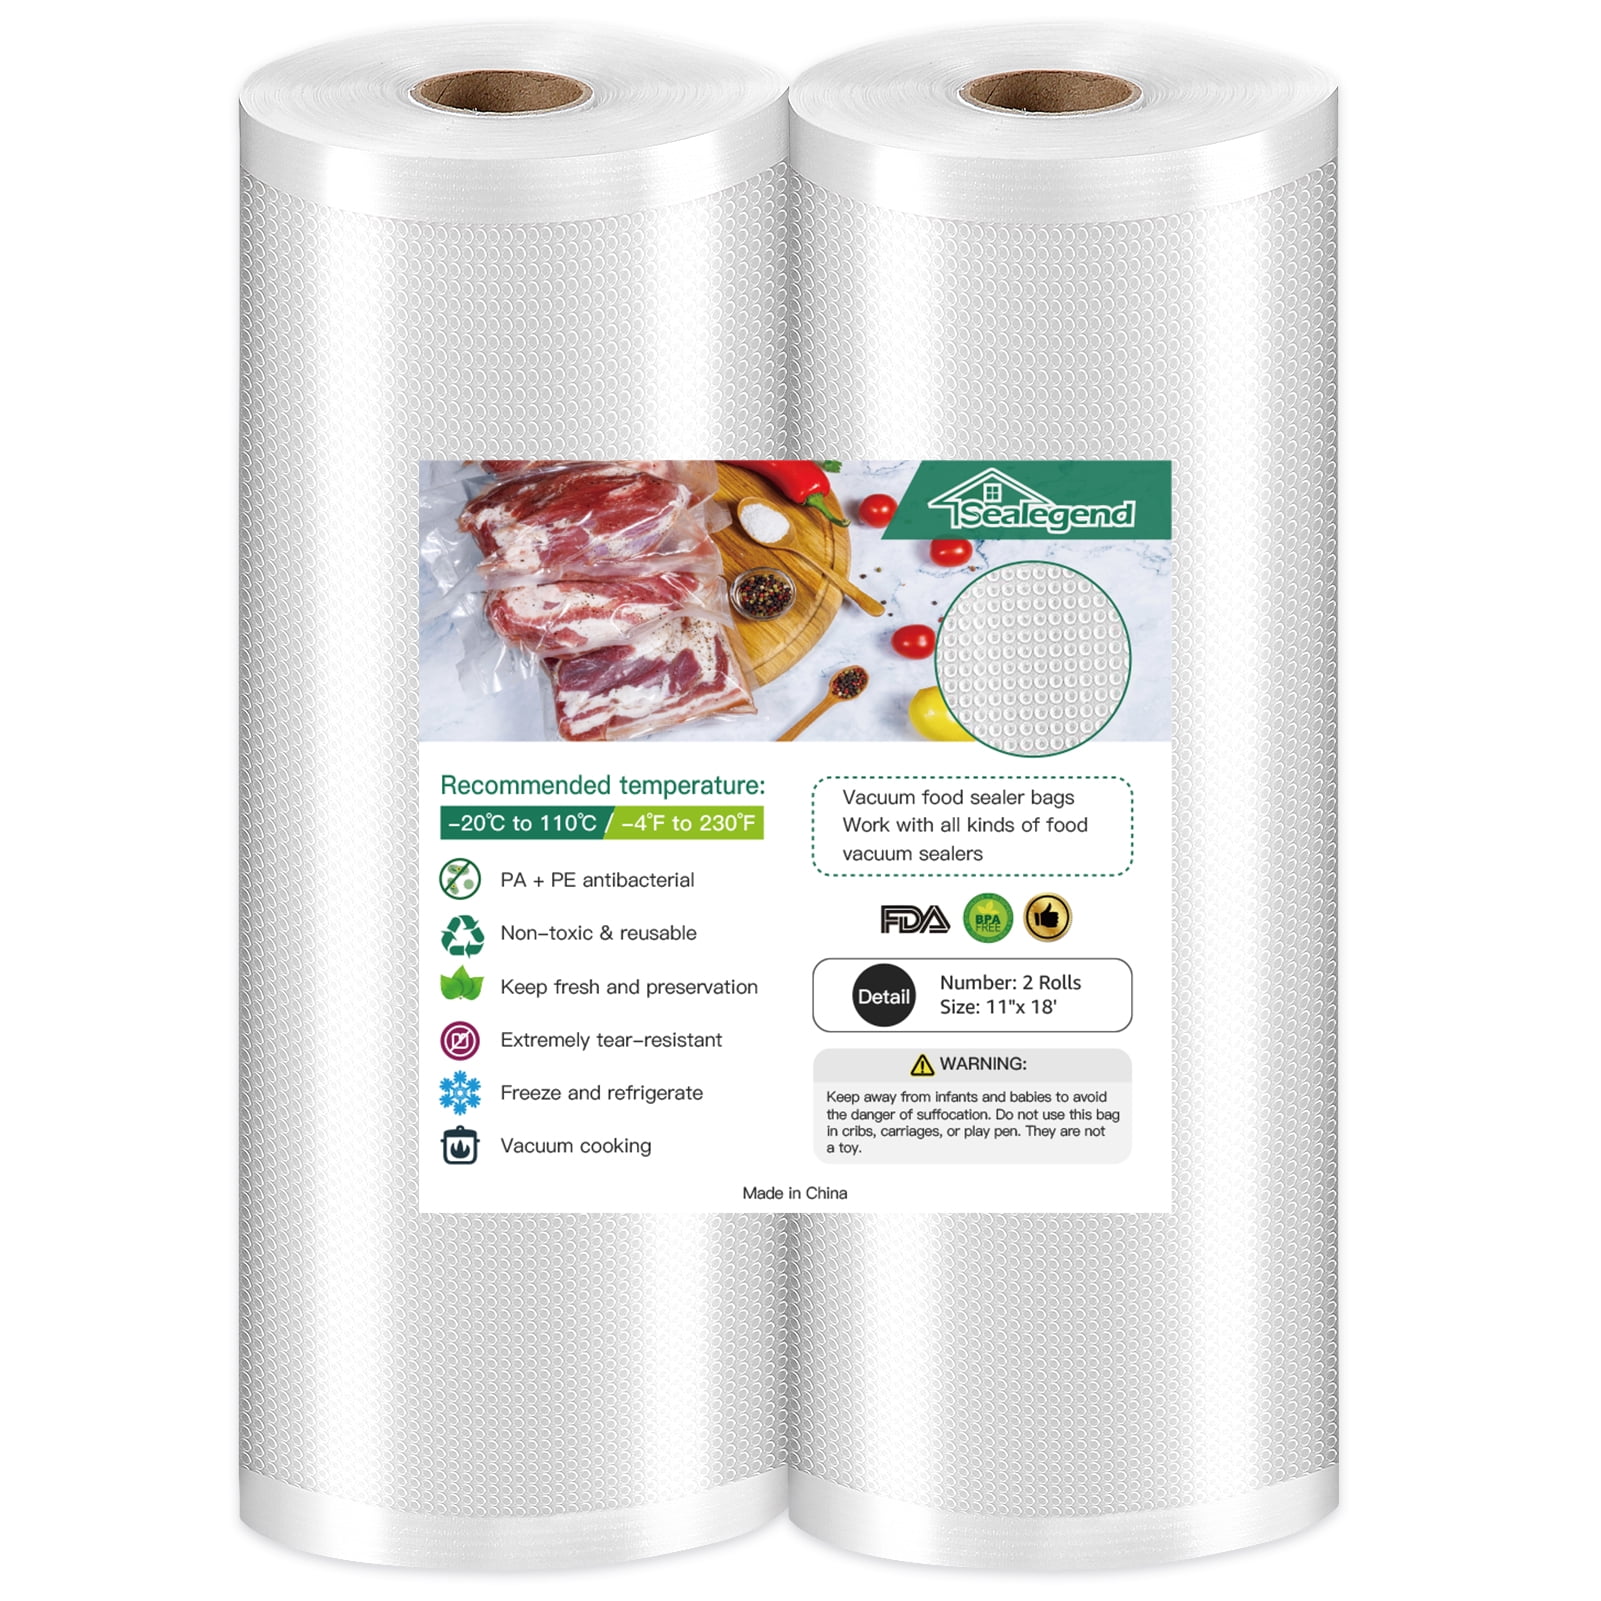 G5-ZGKP-U0TS Houseables Vacuum Sealer Bags, Sous Vide Rolls, Two (2),  Combo, 8 Inch/11 Inch x 50 Ft, Commercial Grade Plastic, Food Vac Stora